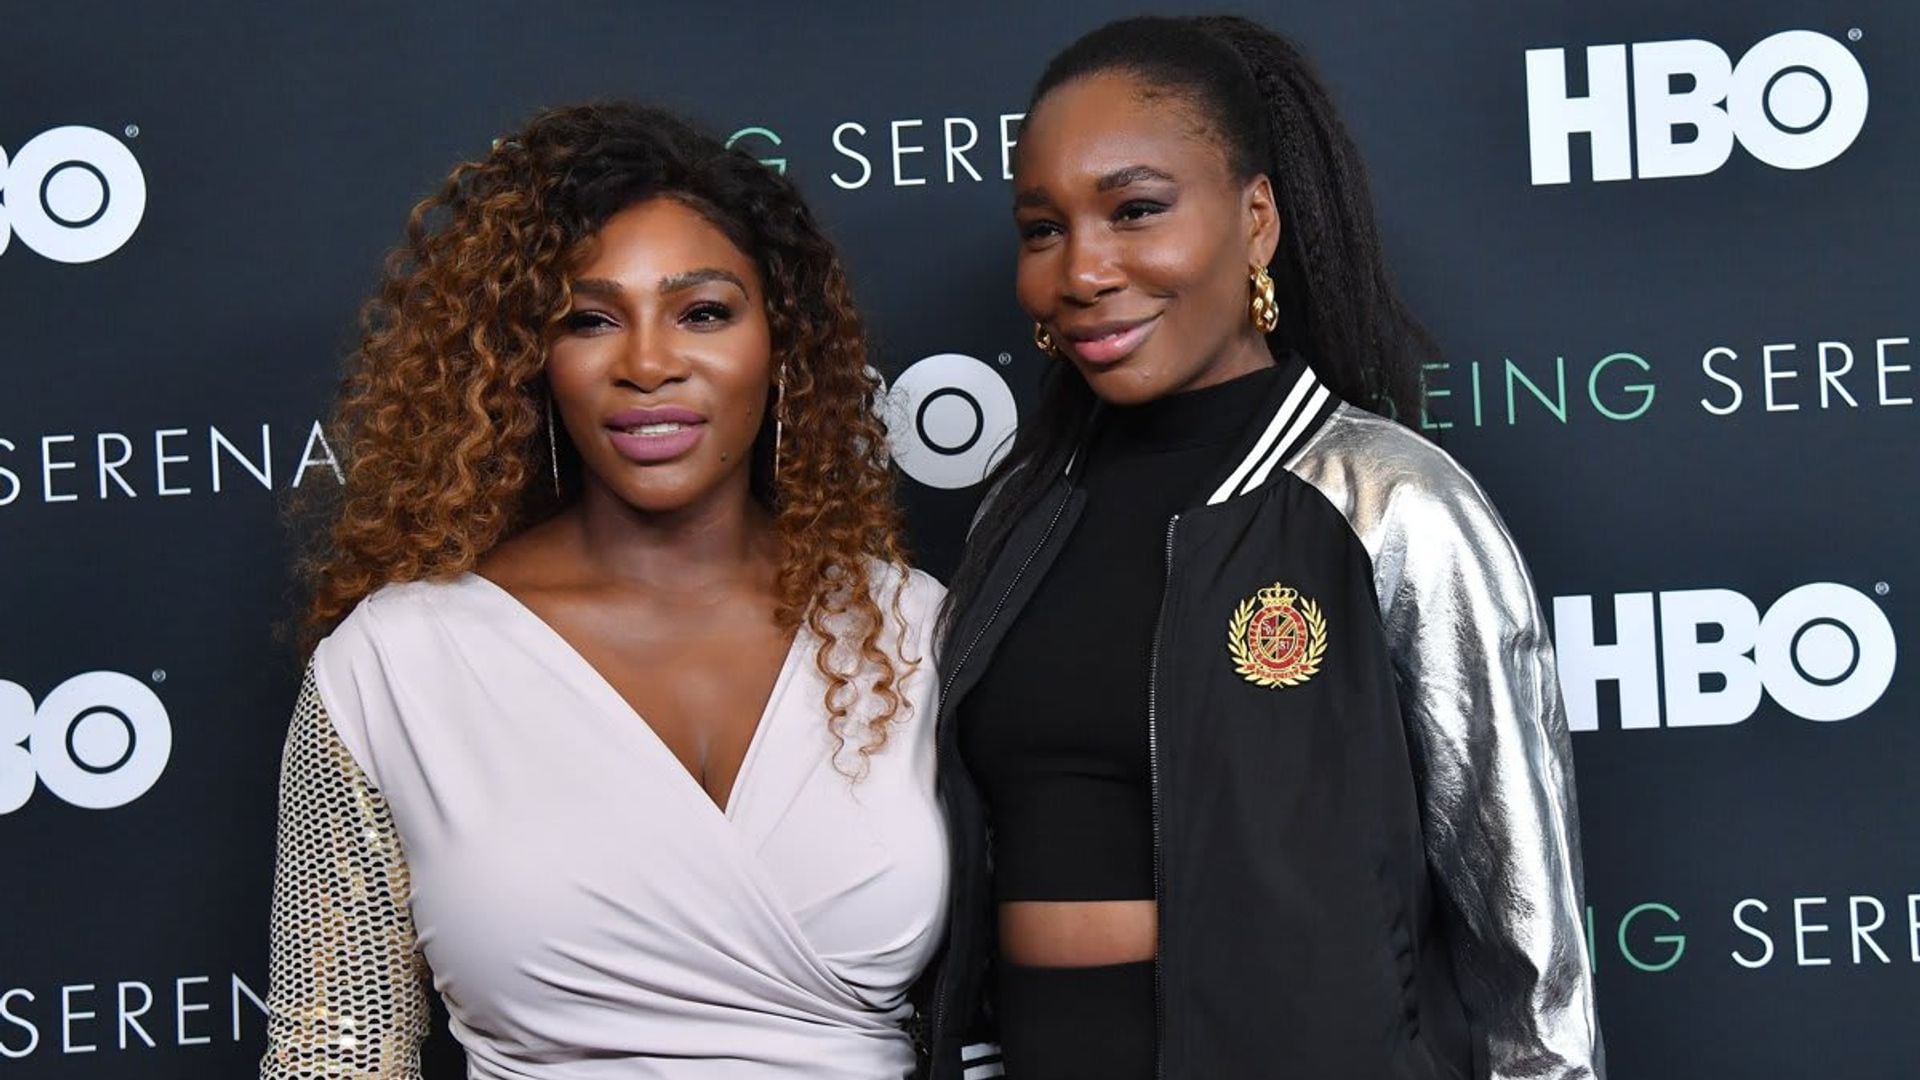 Serena and Venus Williams worked out and took a walk down memory lane together on Instagram live